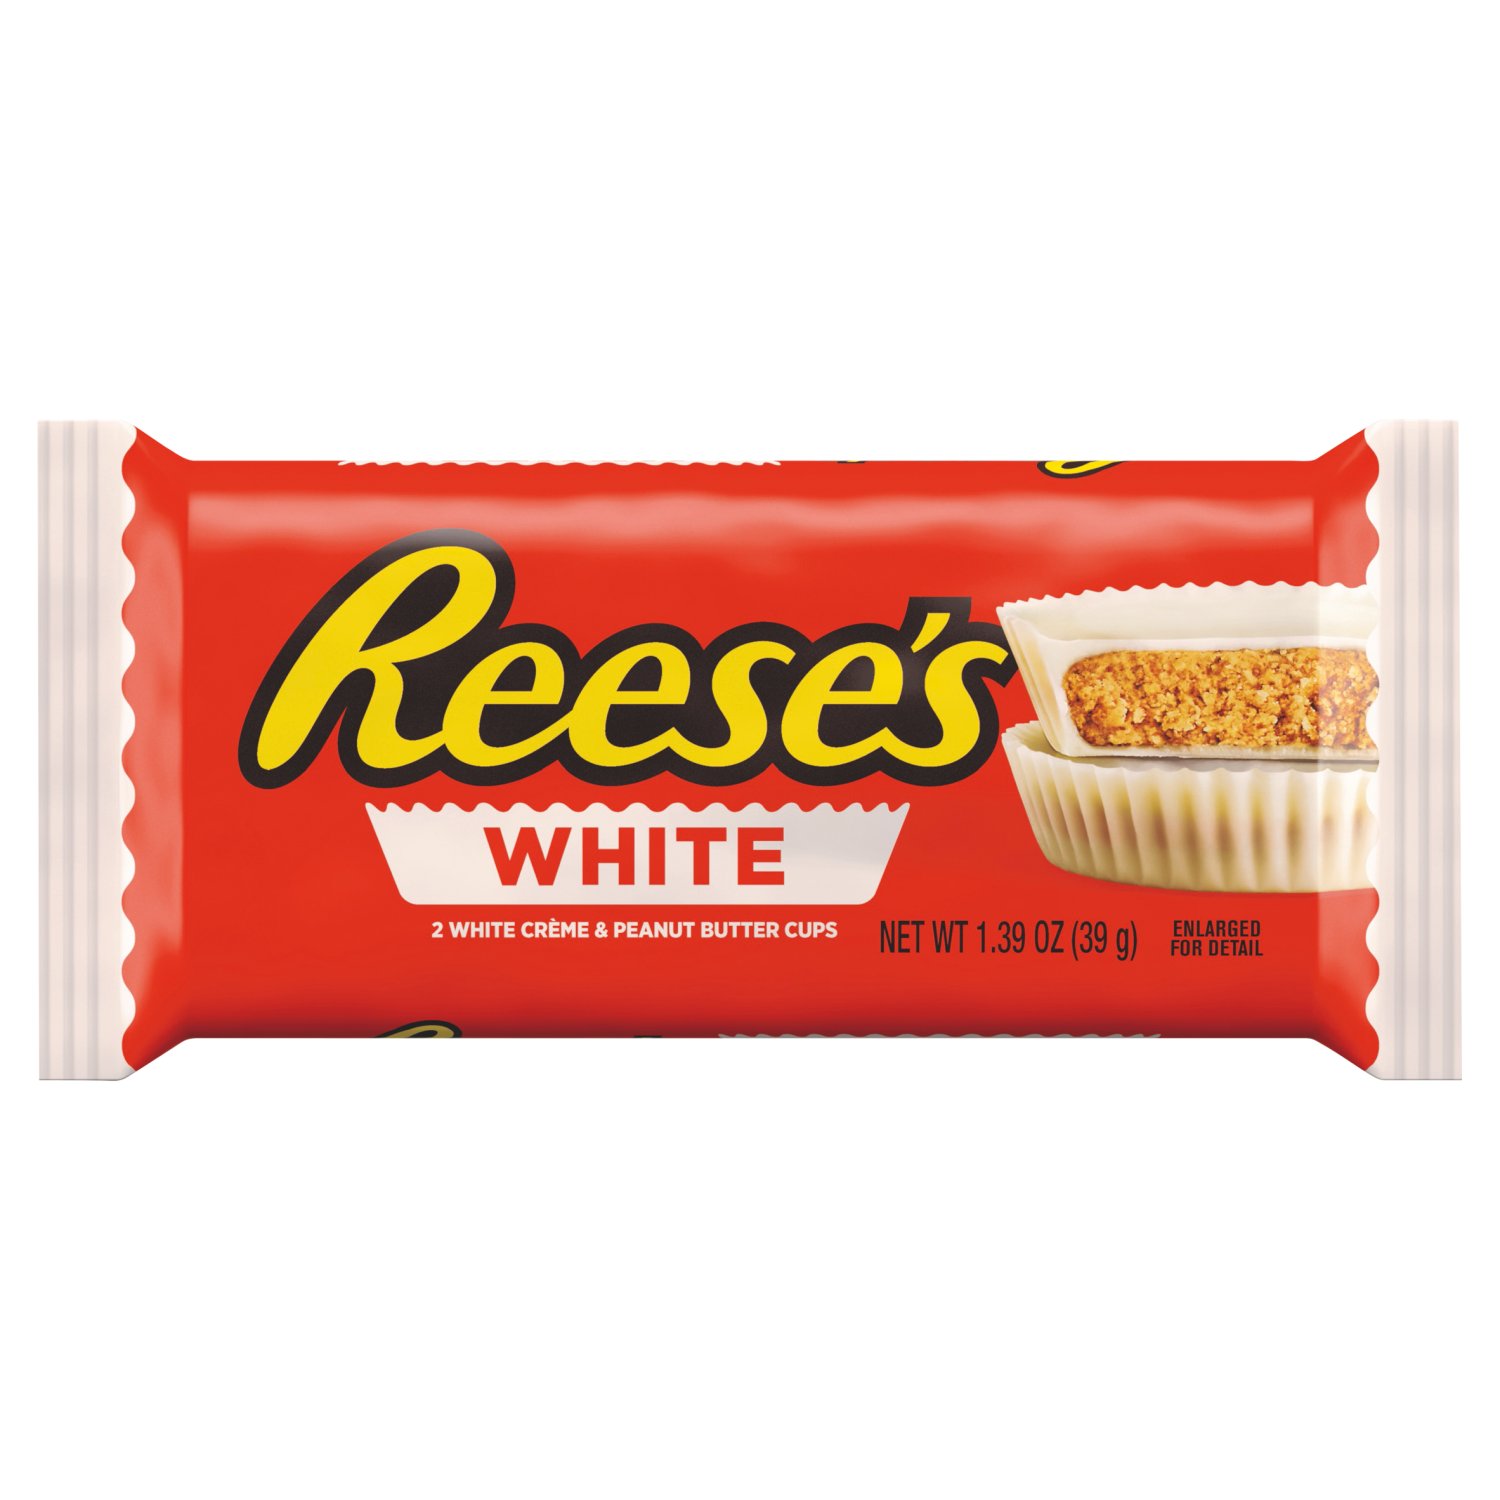 Reeses Peanut Butter White 2 Cup Pack (39.5 g)